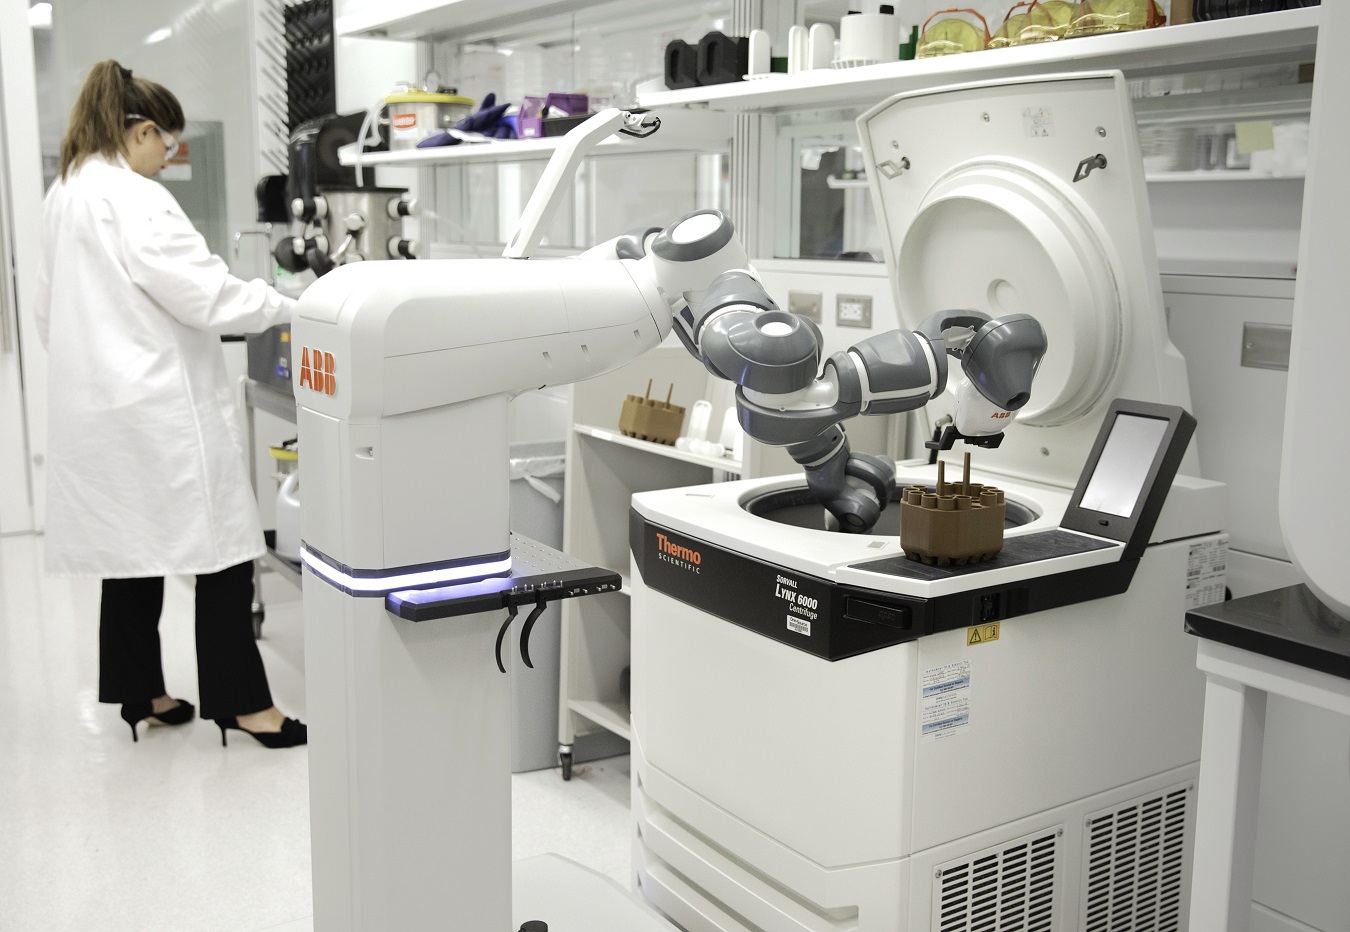 ABB robot working with a centrifuge